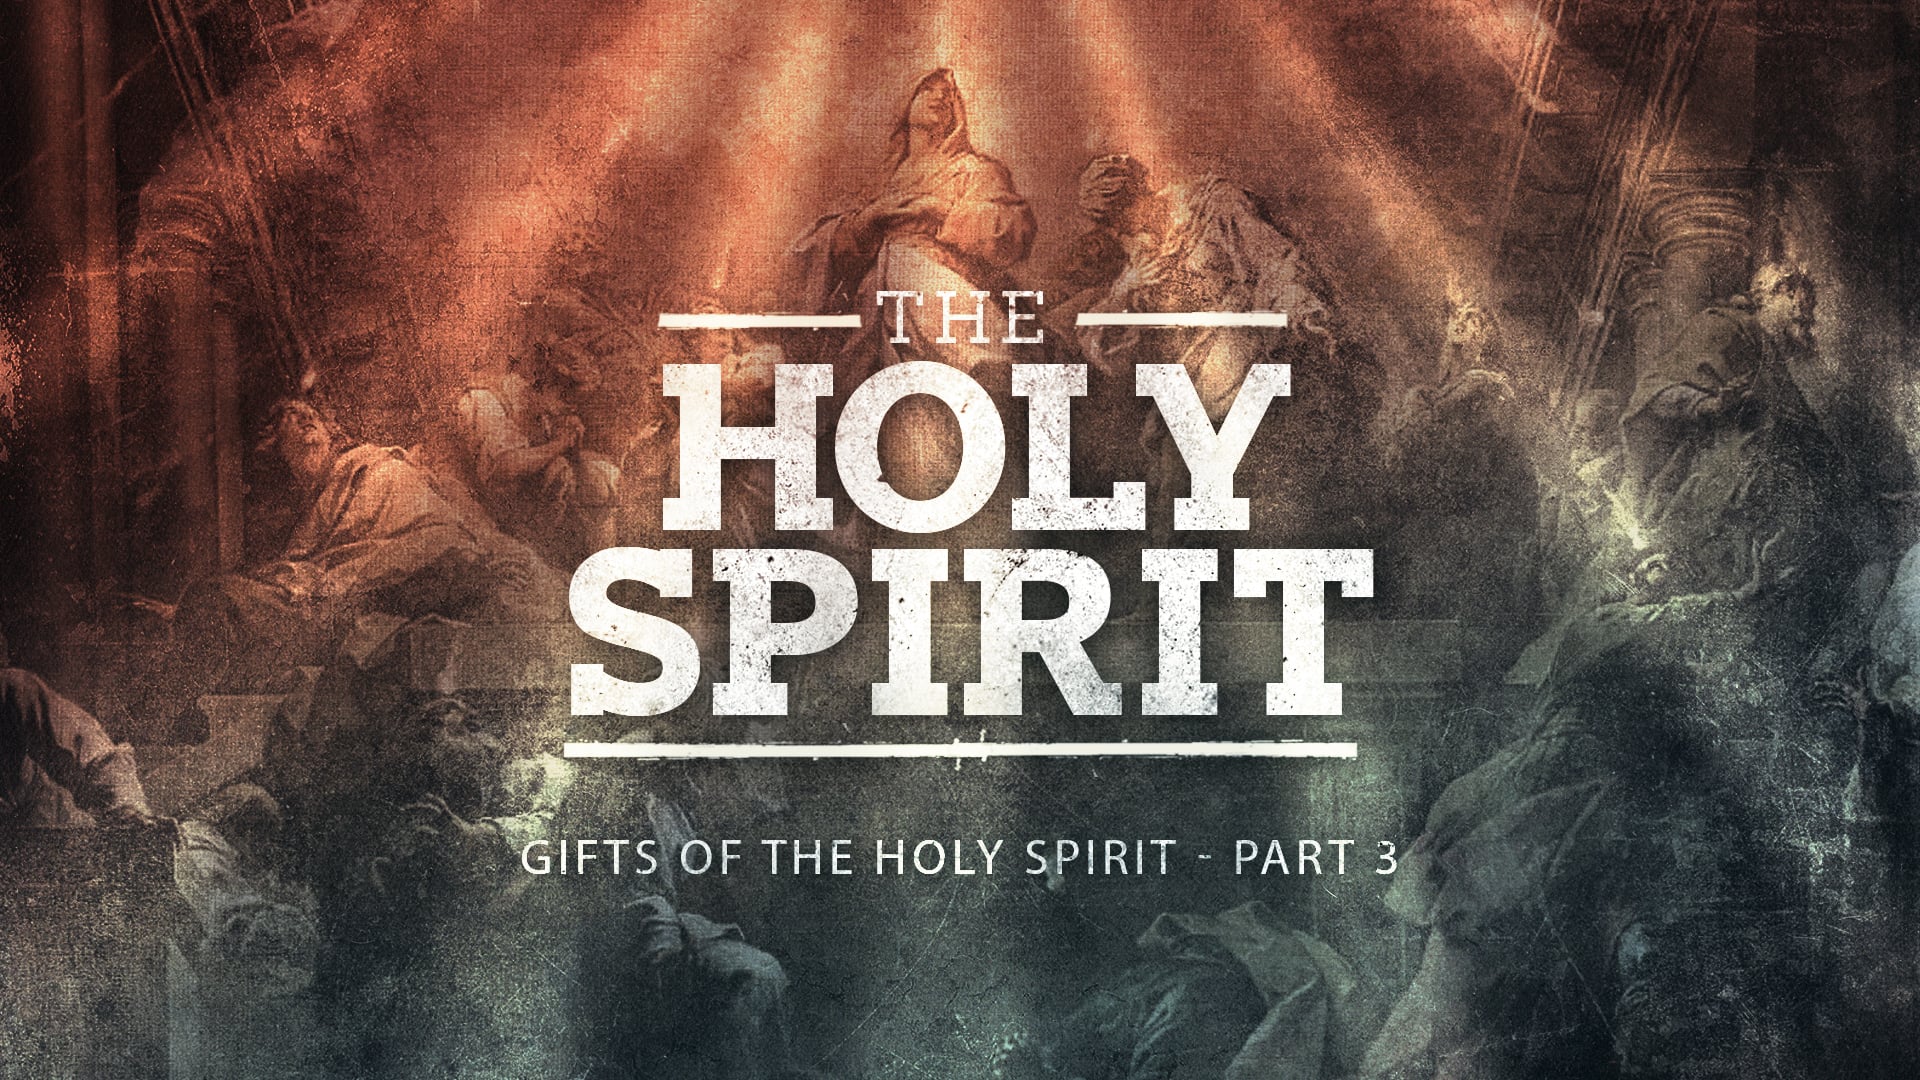 Gifts of the Holy Spirit - Part 3